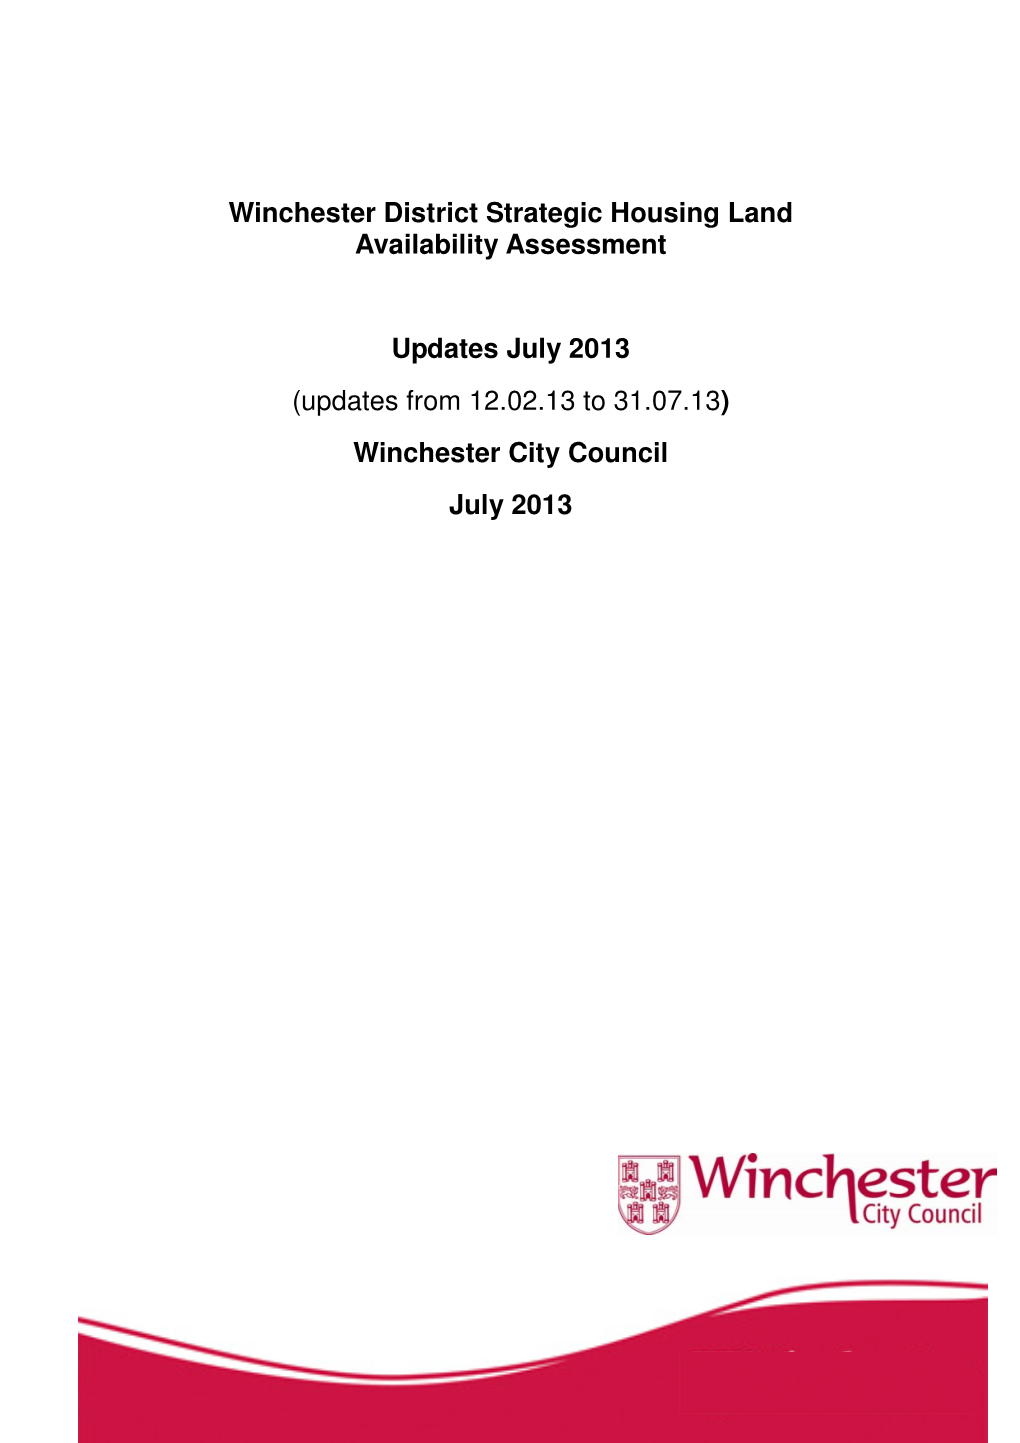 (Updates from 12.02.13 to 31.07.13) Winchester City Council July 2013